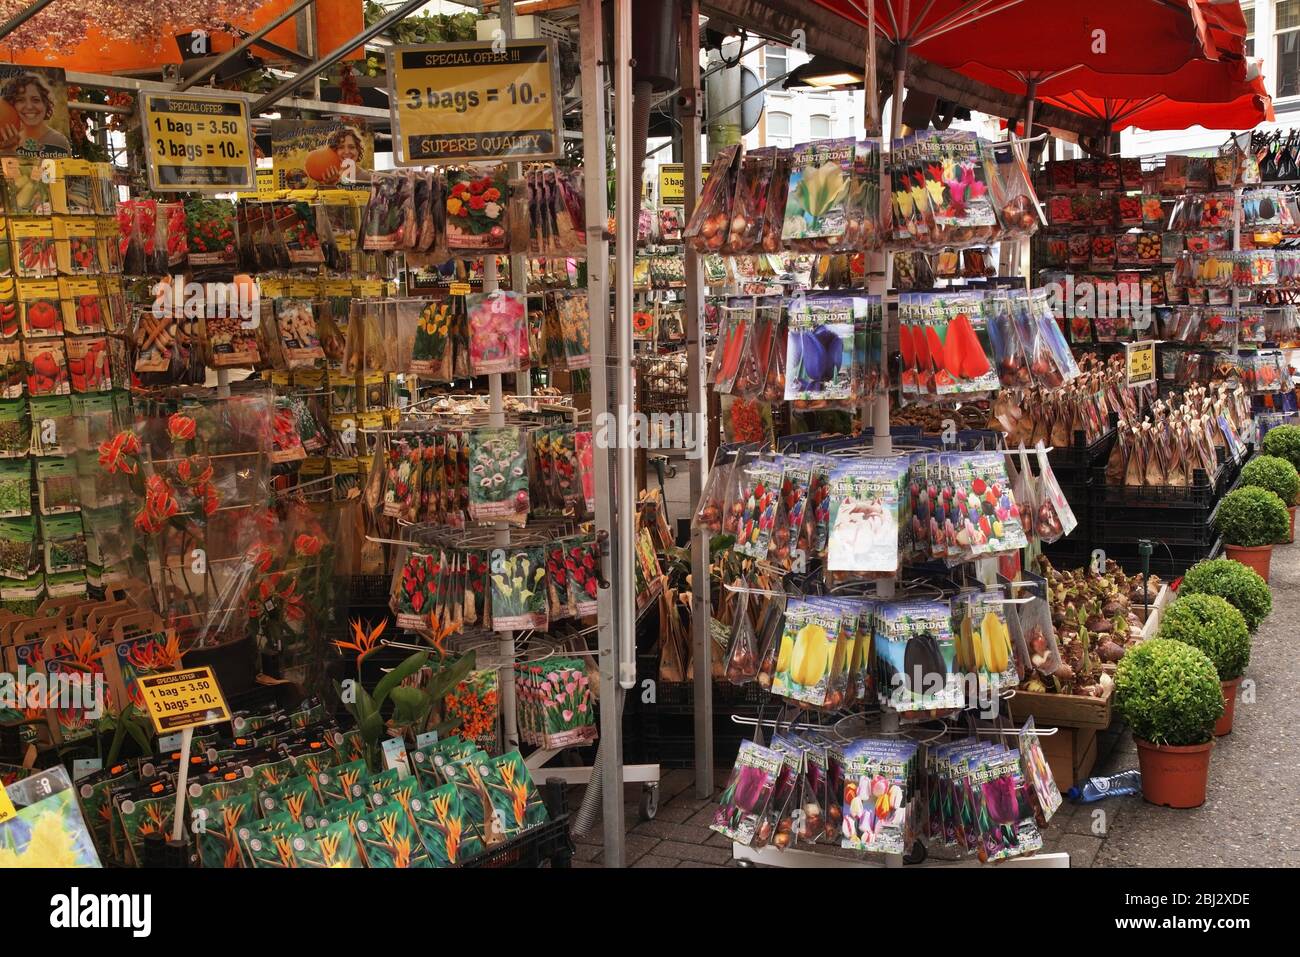 Kiosk with plant seeds at Flower market in Amsterdam. Netherlands Stock Photo